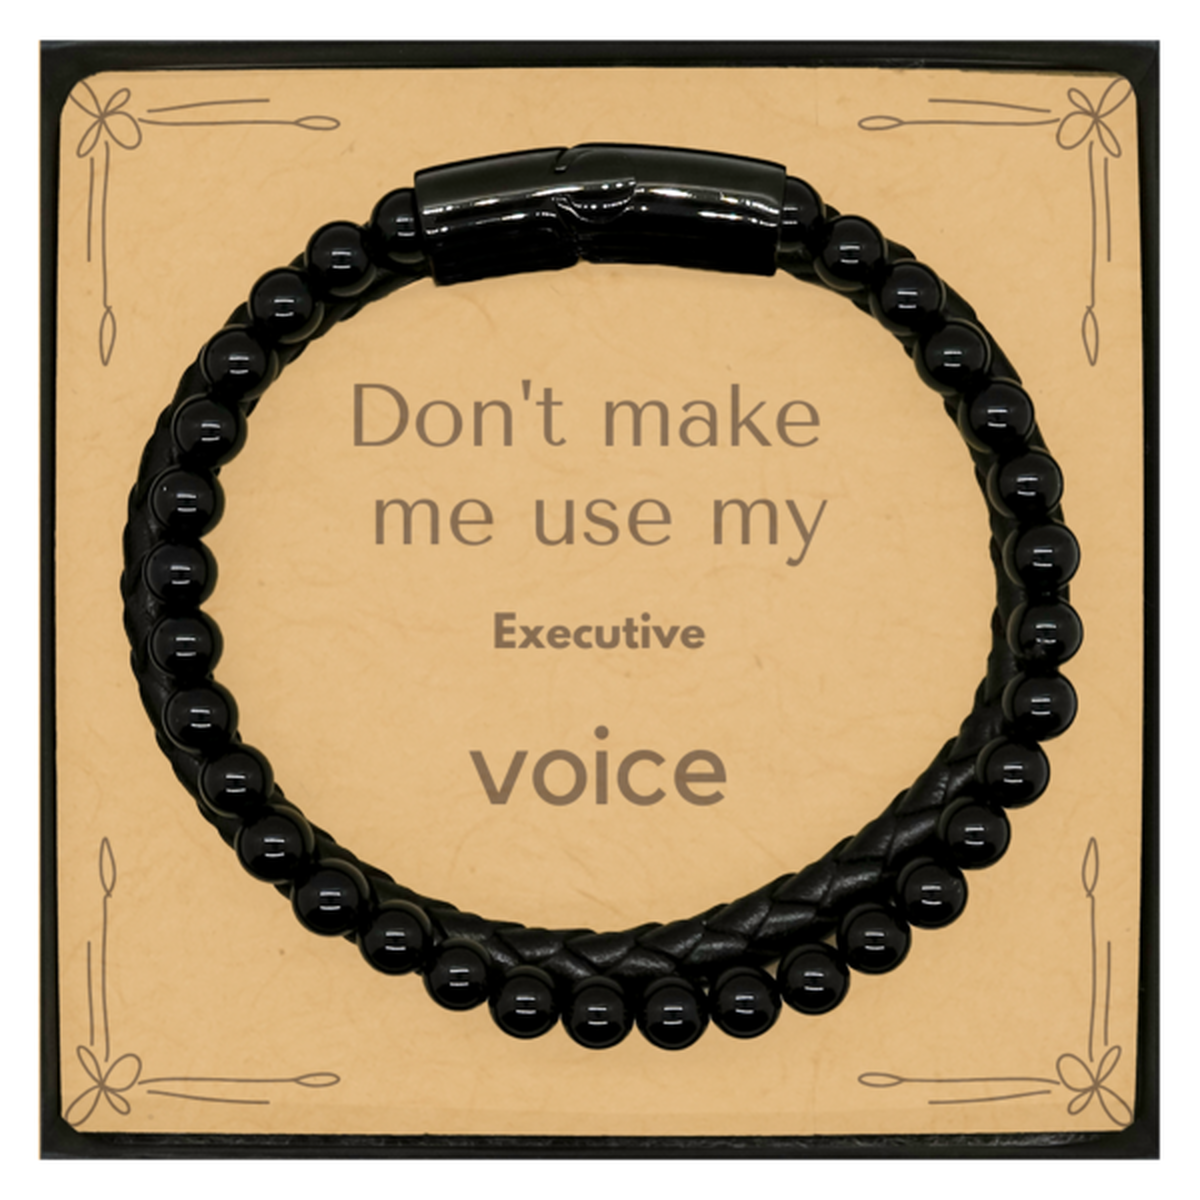 Don't make me use my Executive voice, Sarcasm Executive Card Gifts, Christmas Executive Stone Leather Bracelets Birthday Unique Gifts For Executive Coworkers, Men, Women, Colleague, Friends